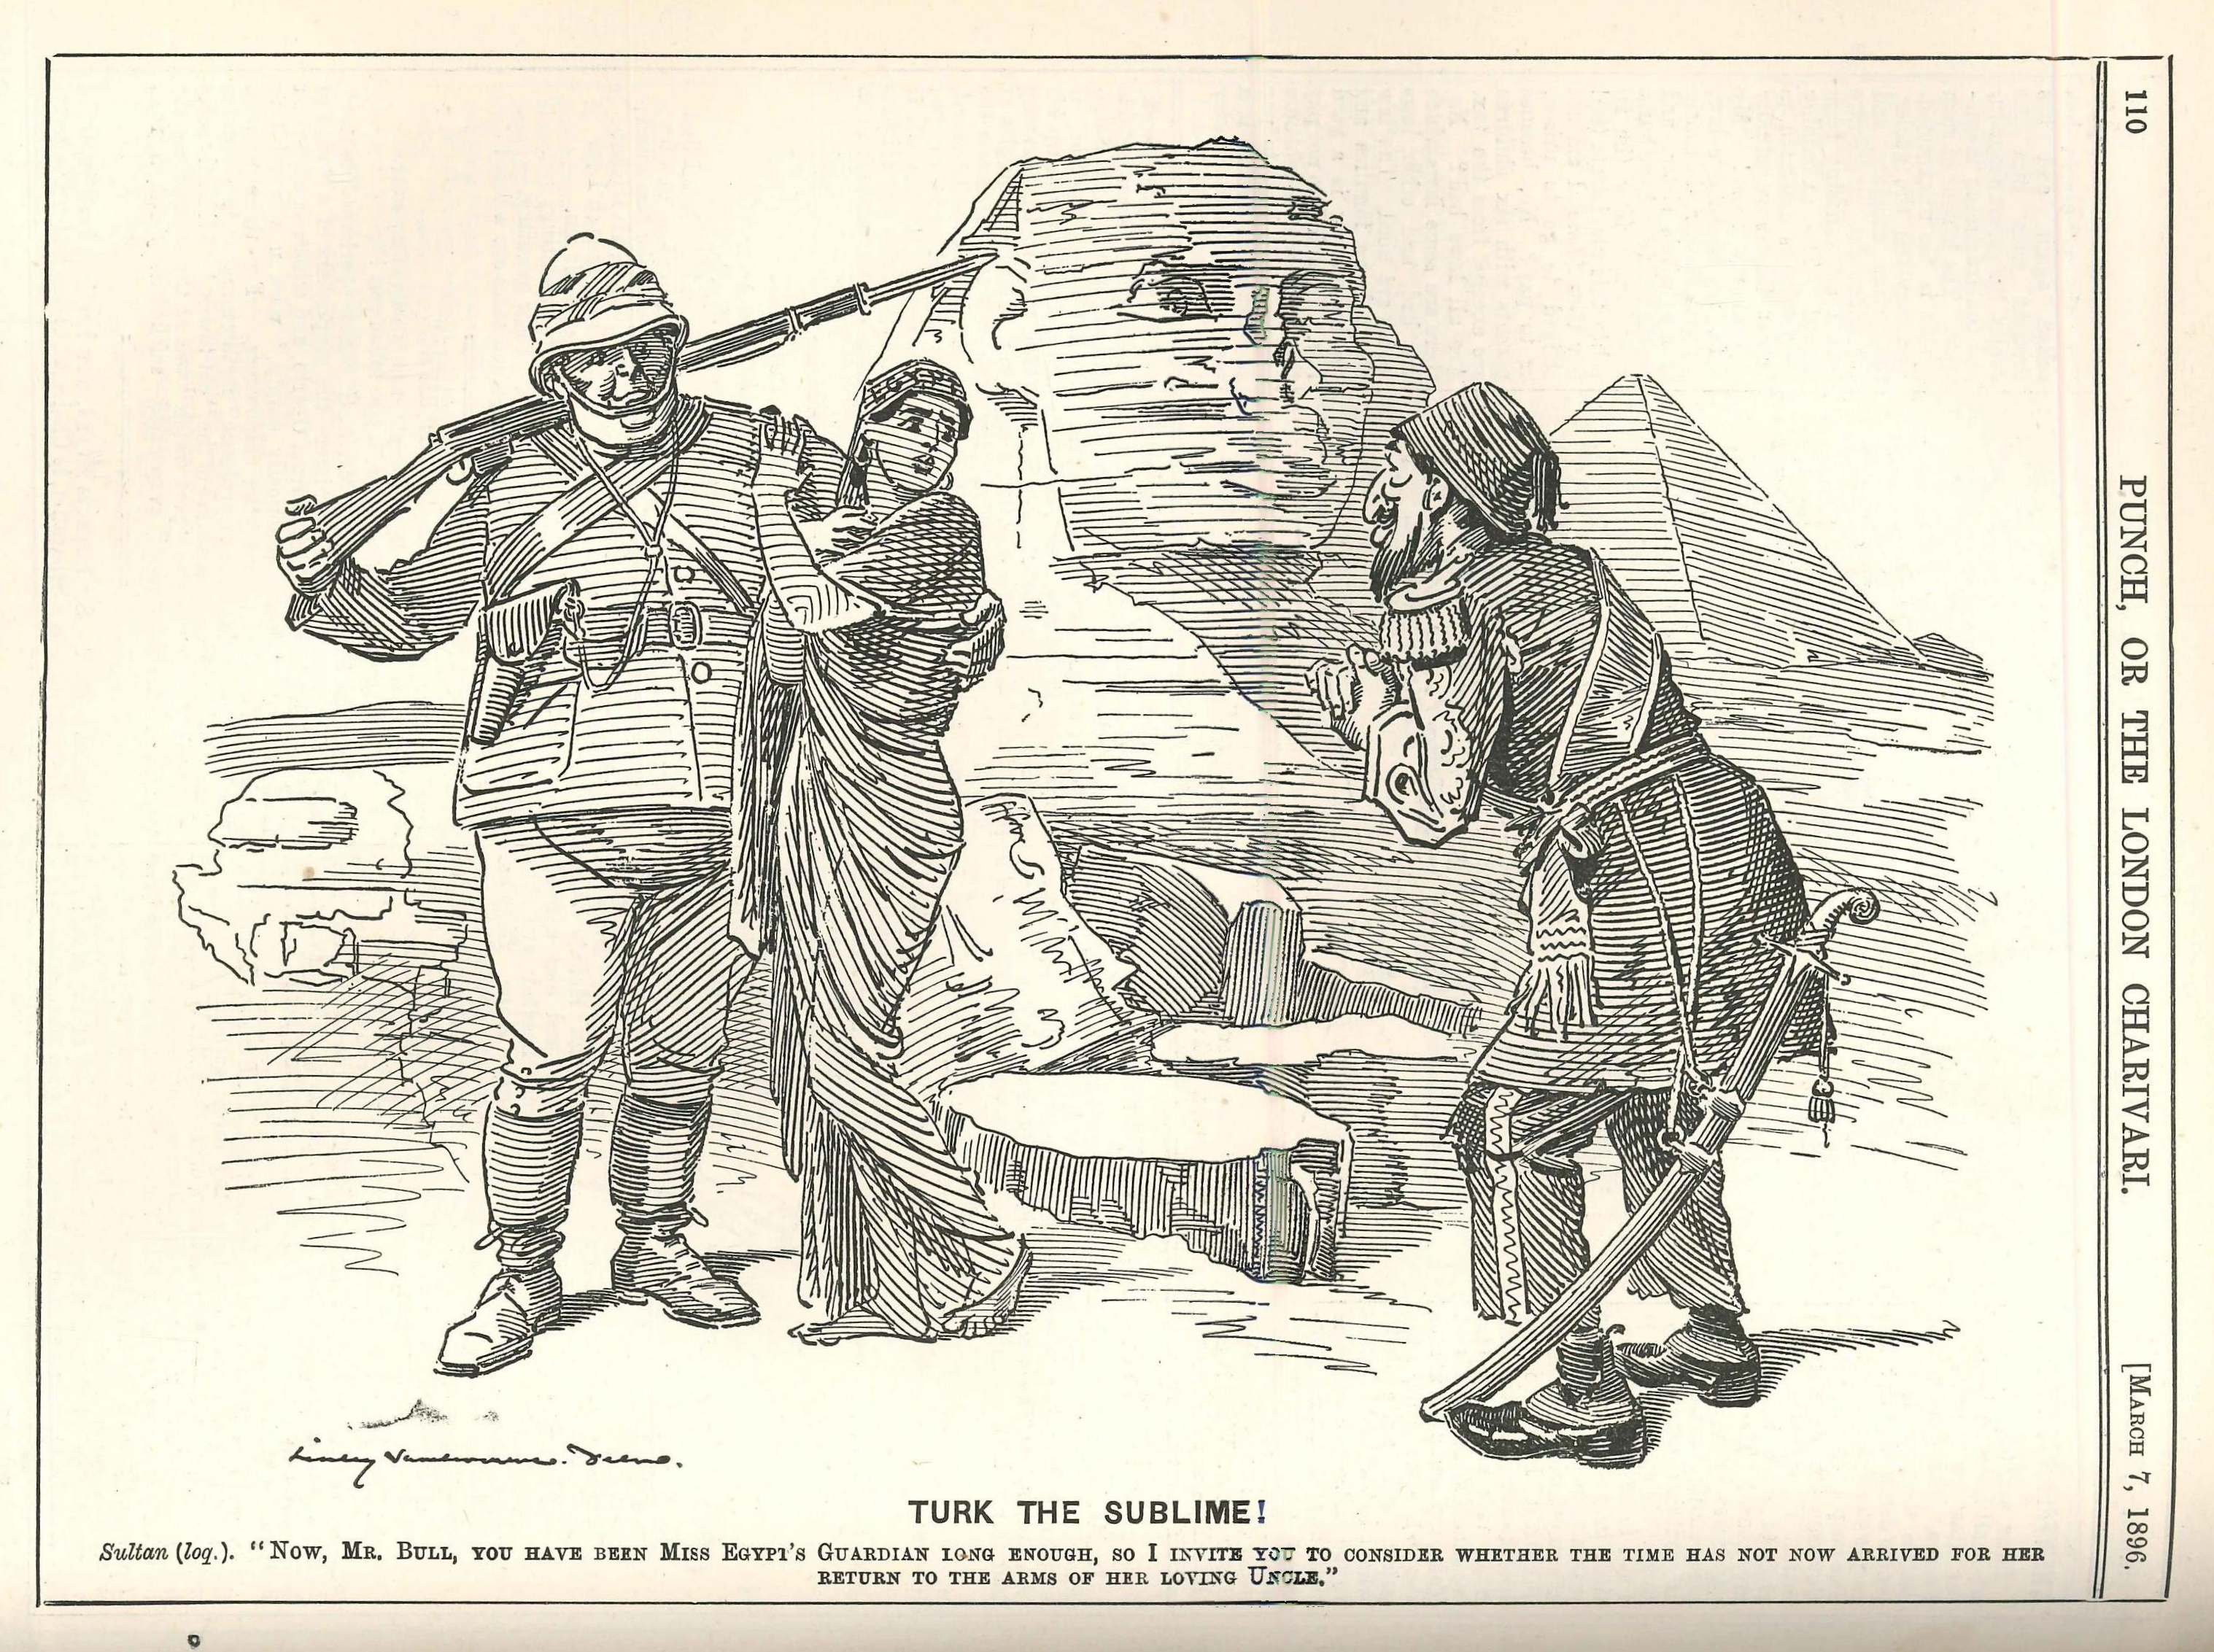 ‘Turk the Sublime!’. Punch: or the London Charivari vol. 110, 16 March 1896, p.110. CUL T992.b.1